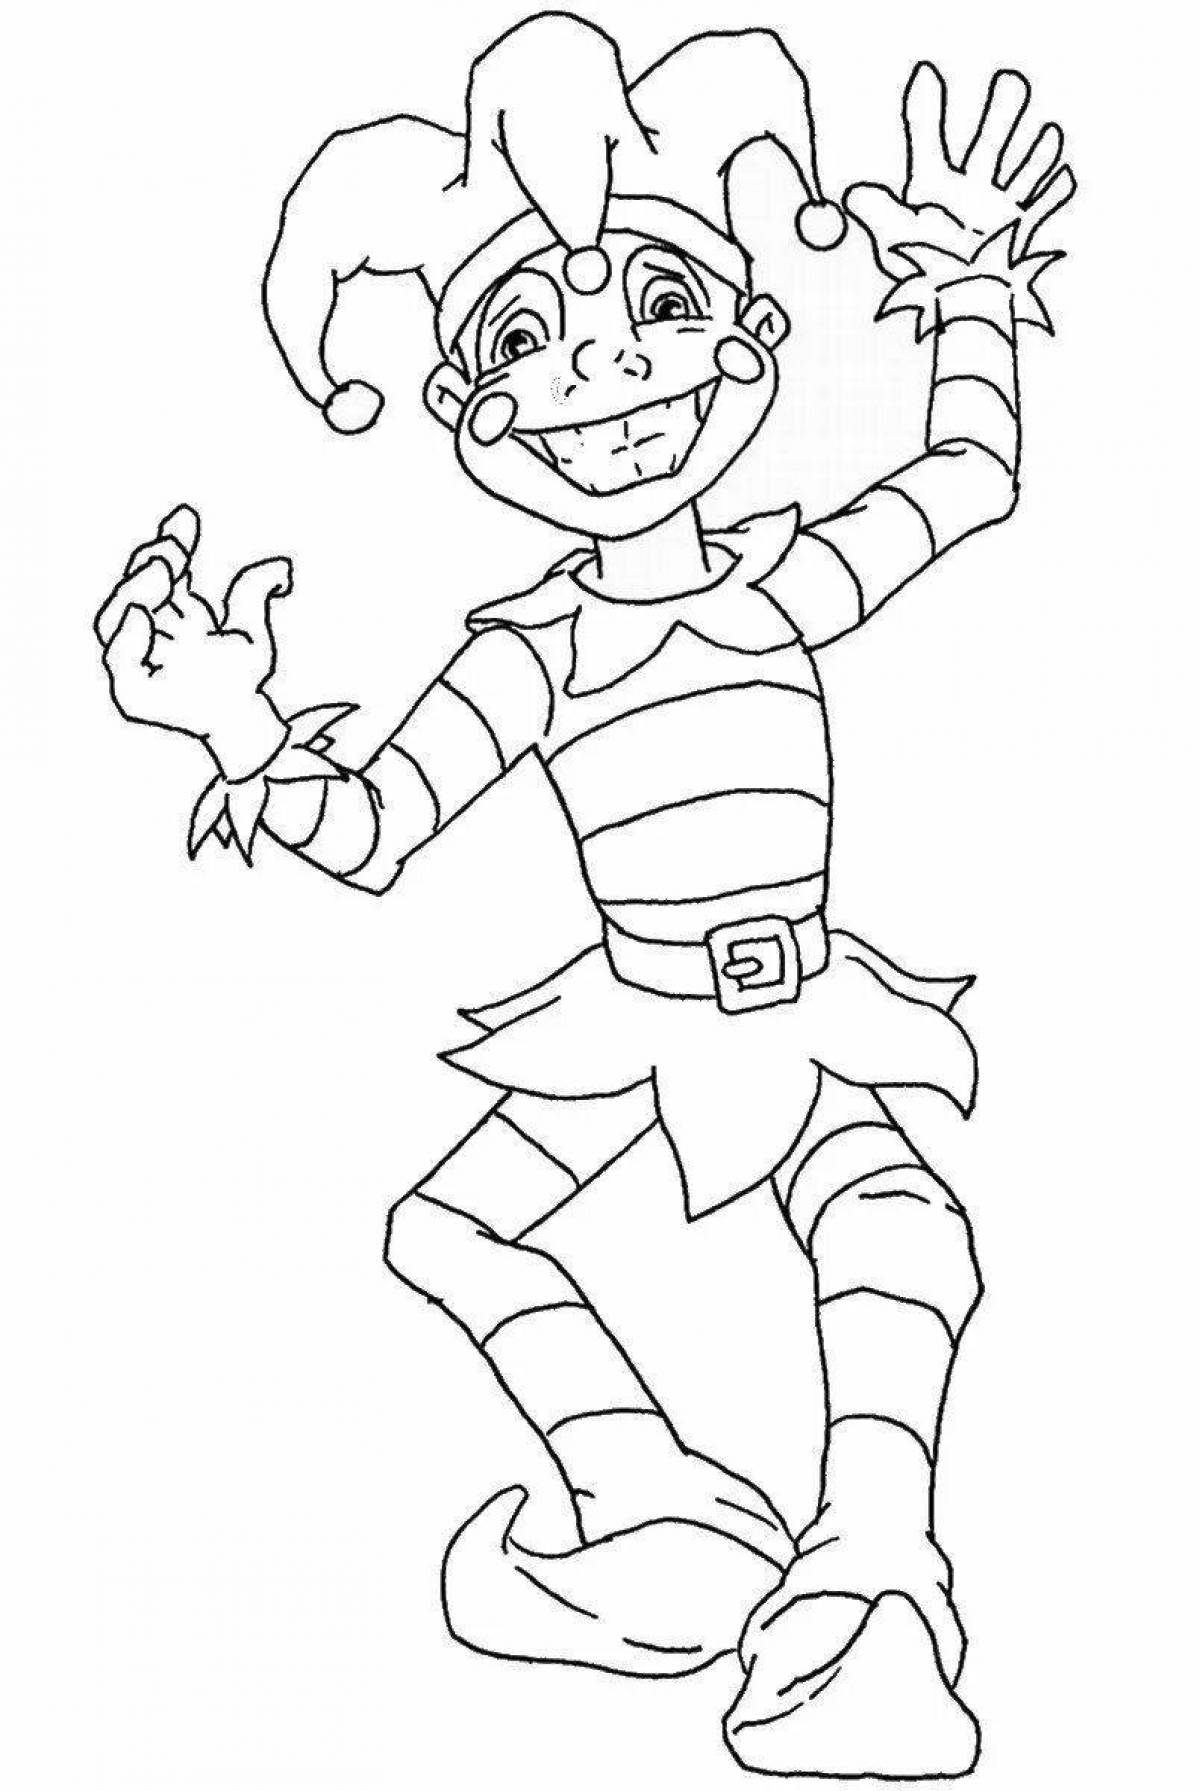 Playful jester coloring page for kids